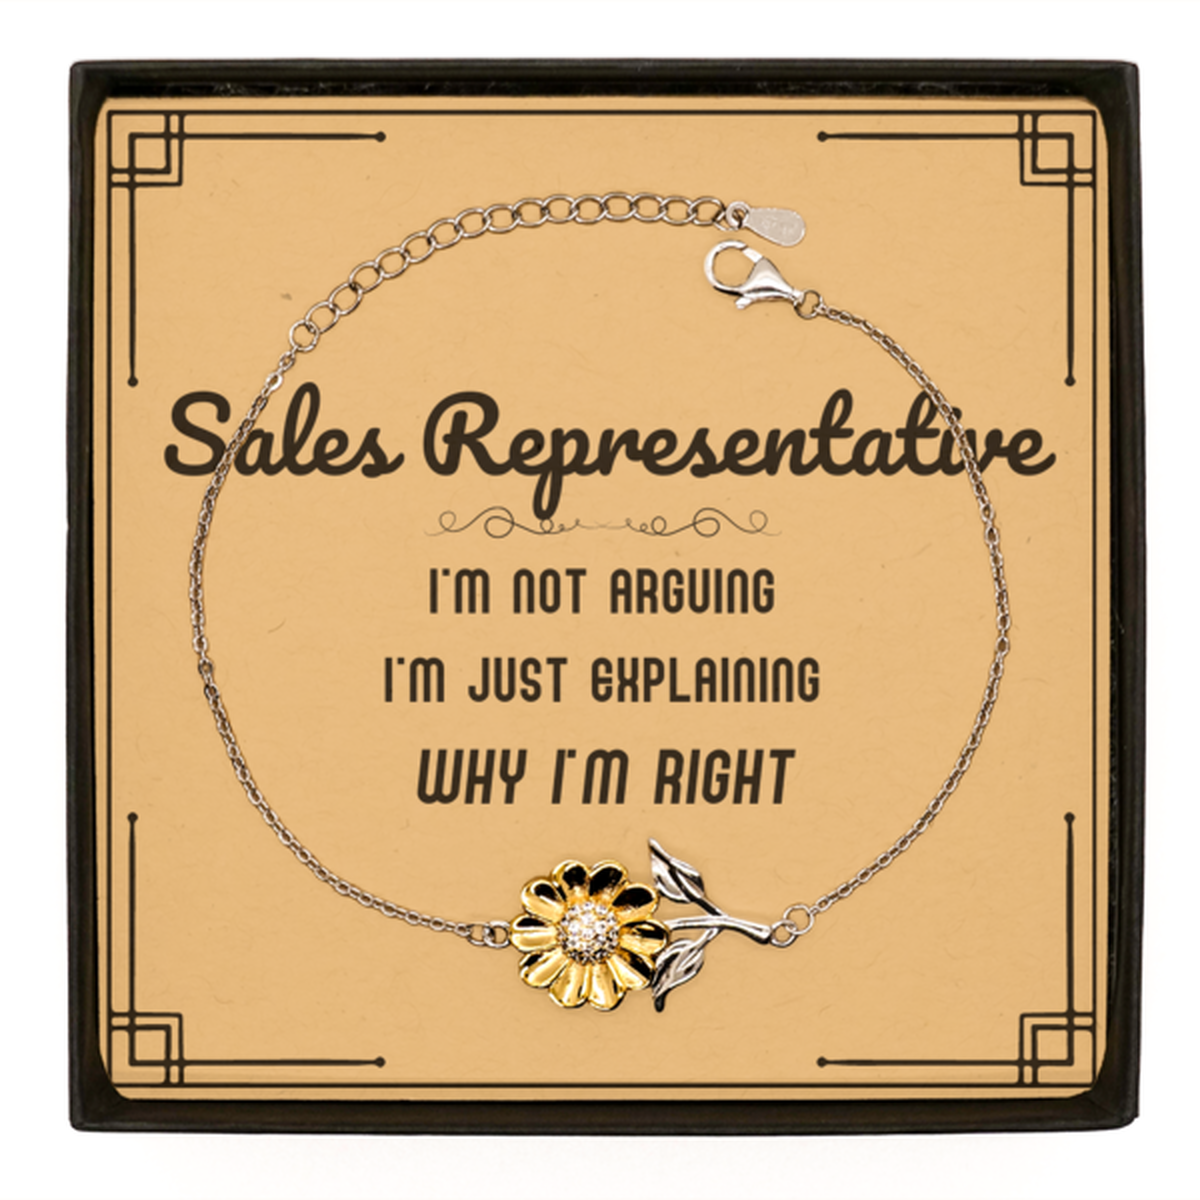 Sales Representative I'm not Arguing. I'm Just Explaining Why I'm RIGHT Sunflower Bracelet, Funny Saying Quote Sales Representative Gifts For Sales Representative Message Card Graduation Birthday Christmas Gifts for Men Women Coworker